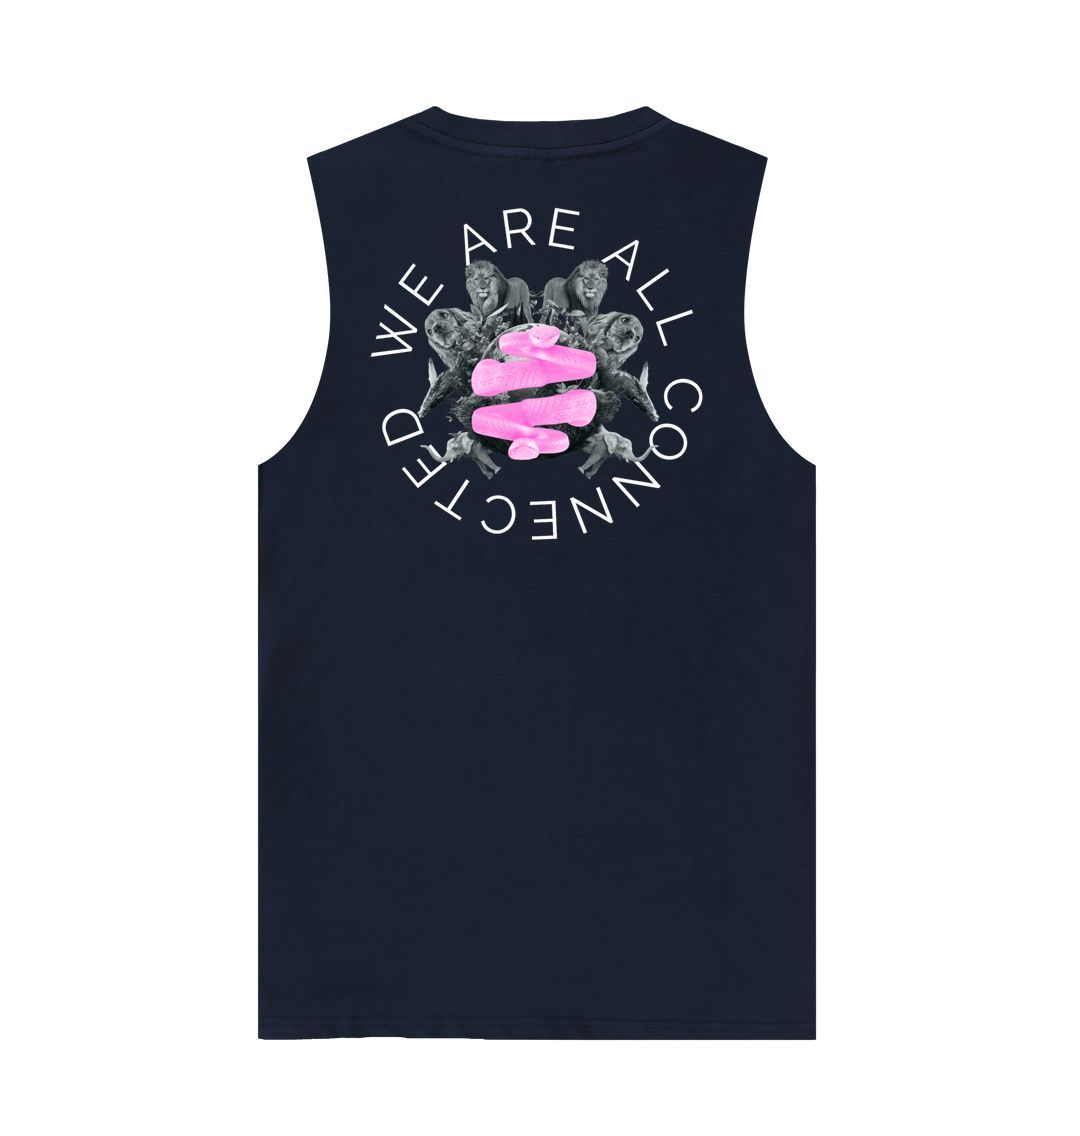 Navy Blue Connected Tank